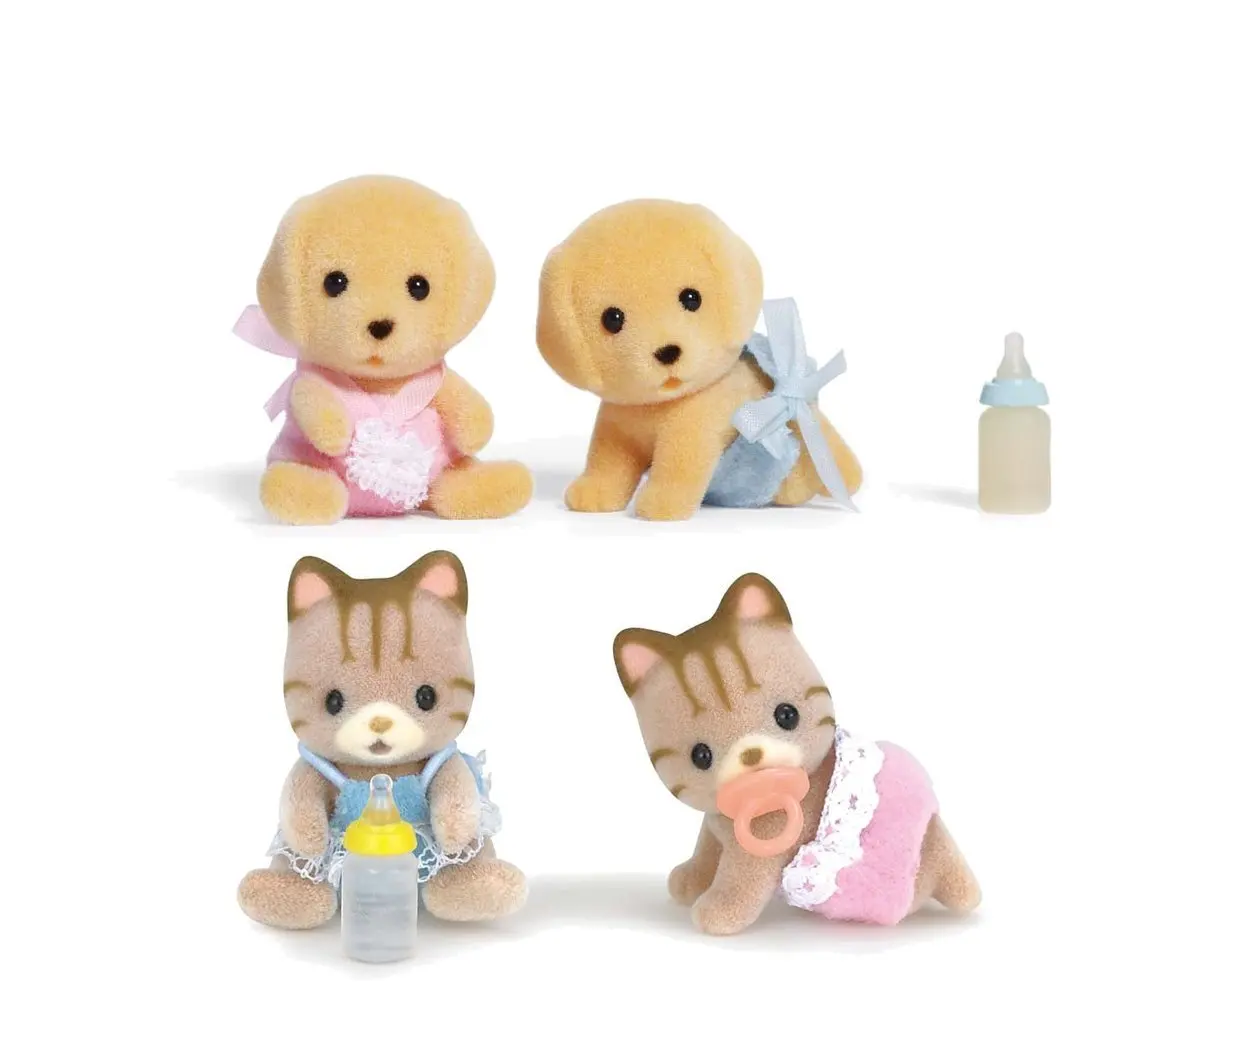 calico critters yellow lab family